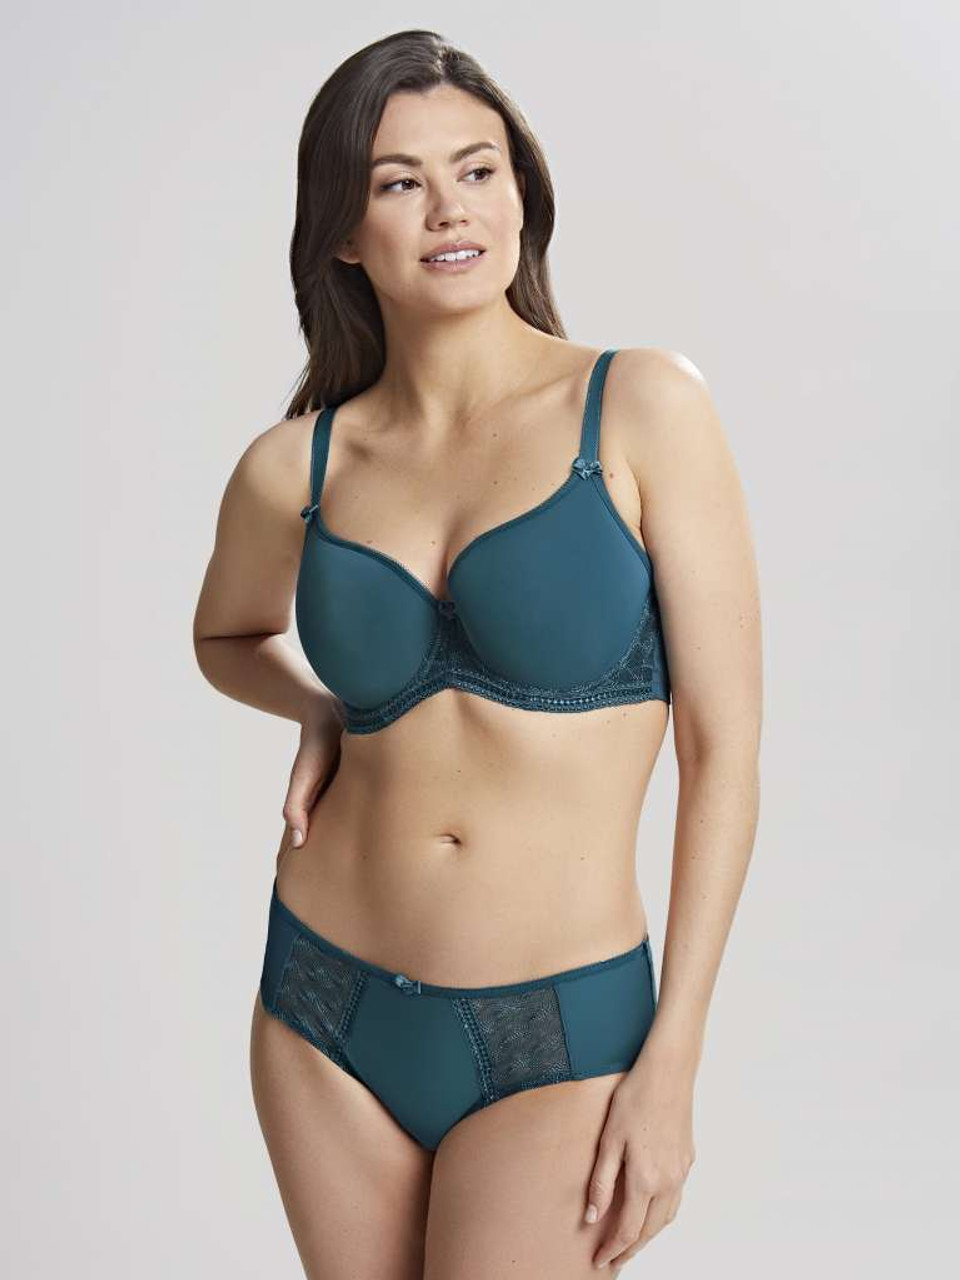 The Panache Cari Spacer Bra and it's Benefits - Page 2 of 17